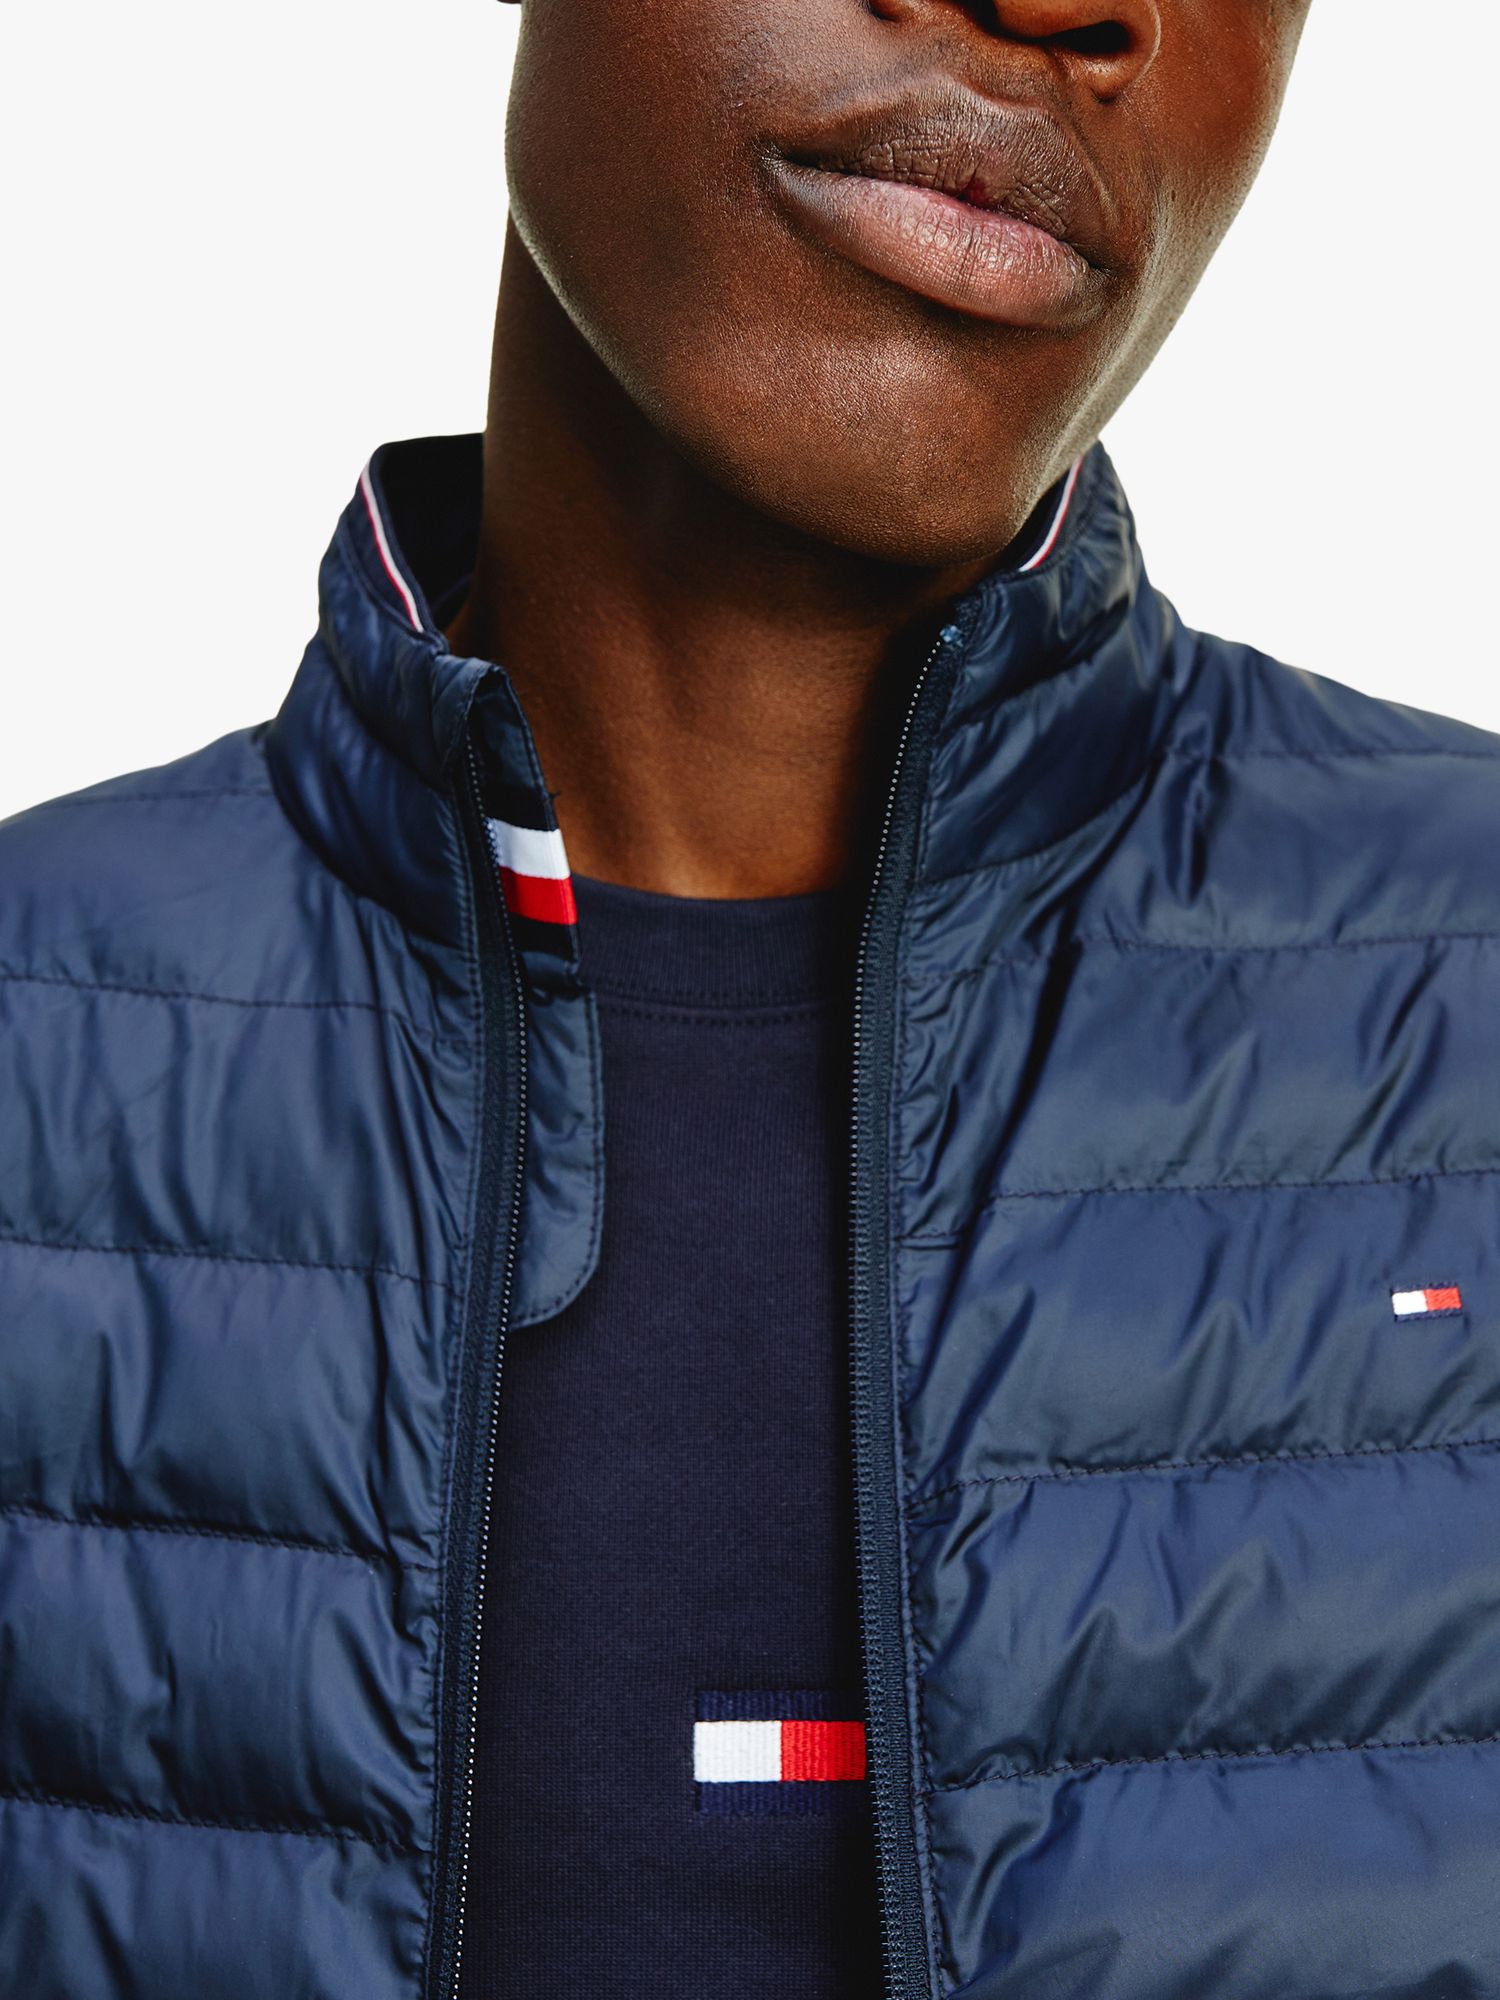 Packable John Sky Lewis Desert Jacket, Hilfiger Tommy Partners & at Quilted Down